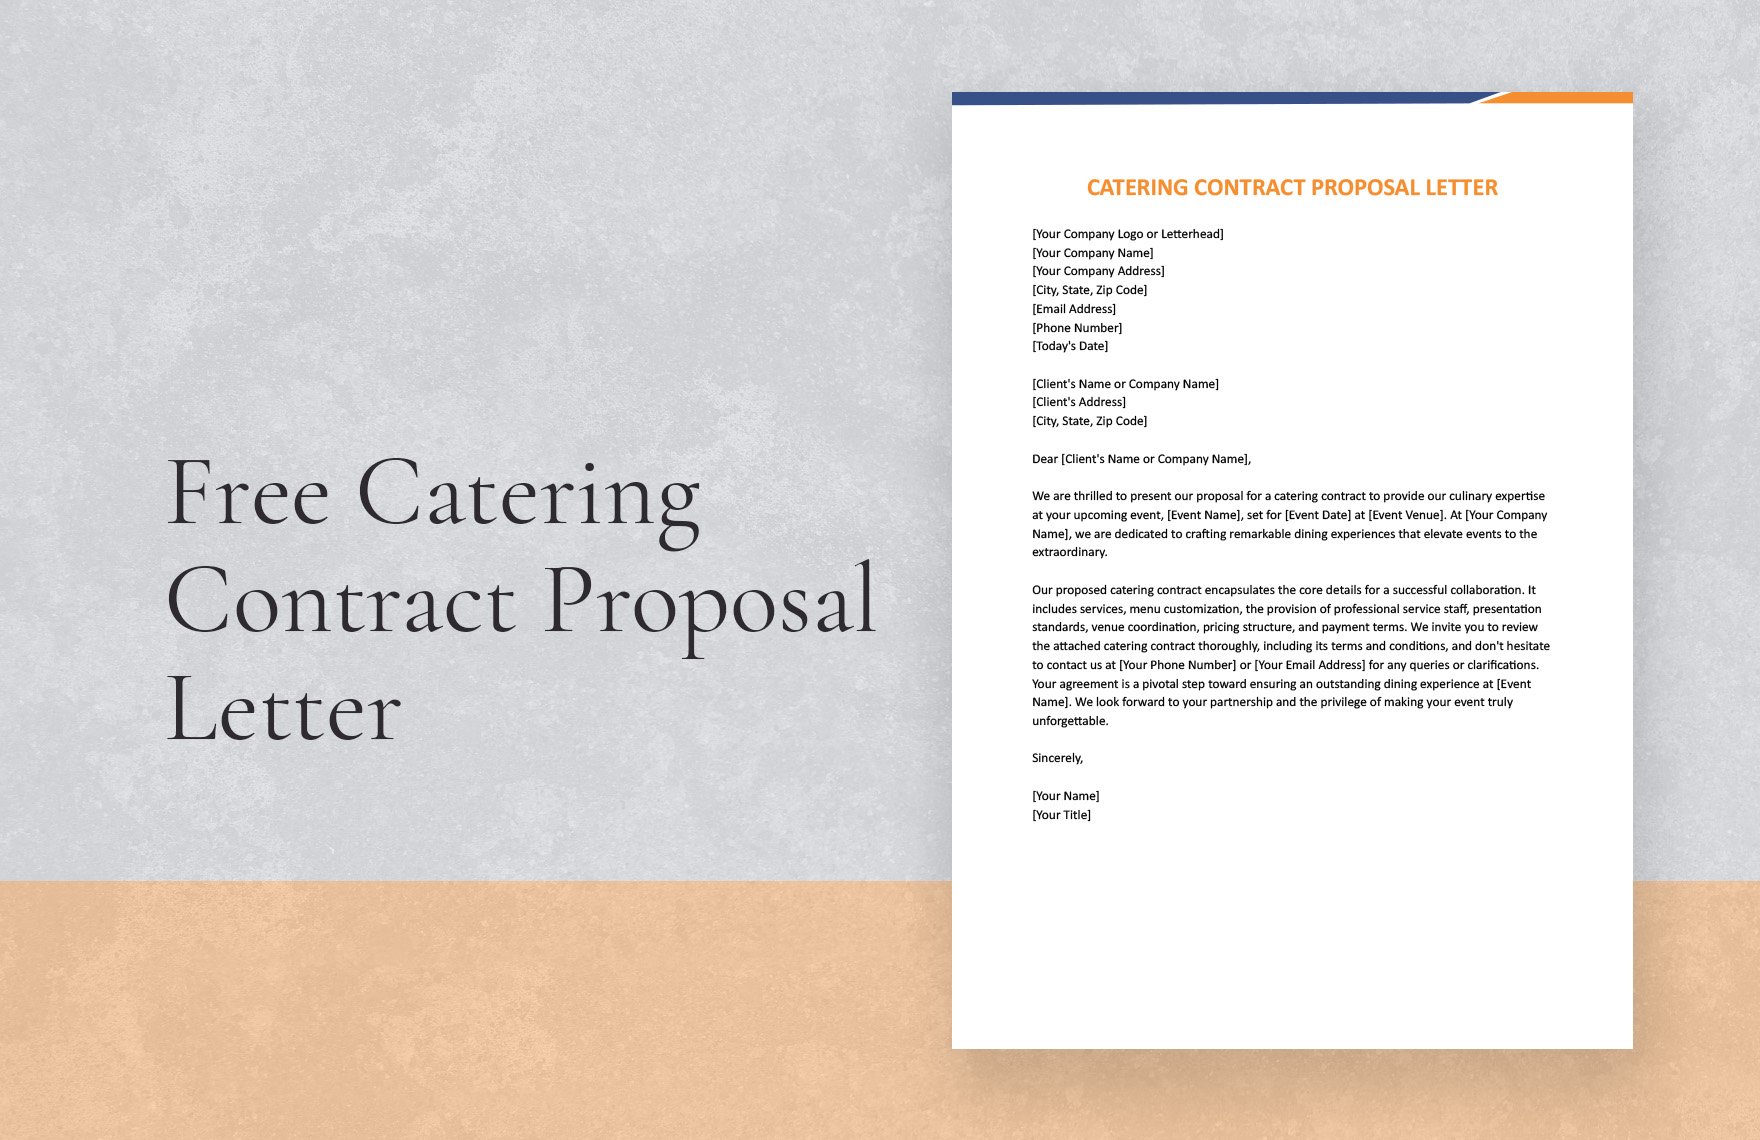 Catering Contract Proposal Letter